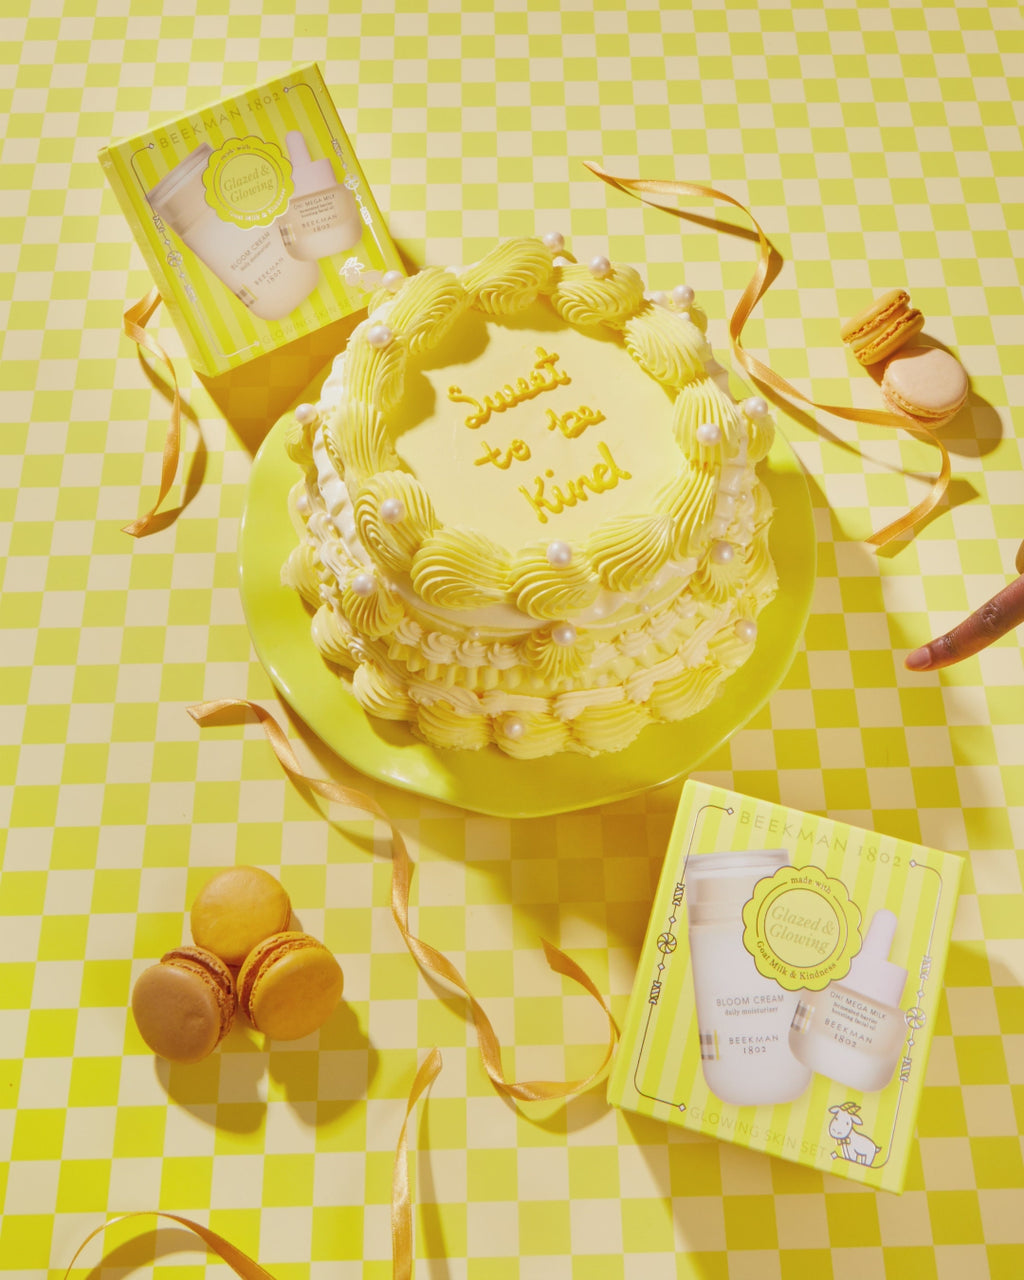 GIF of a yellow cake that says "sweet to be kind" next to two gift boxes for the Glazed & Glowing Advanced Hydration Gift set, with a hand coming from the right side and touching one of the boxes, and both of the boxes disappear to show  the Bloom cream daily Moisturizer and the Oh mega milk serum, on a yellow checkered background.